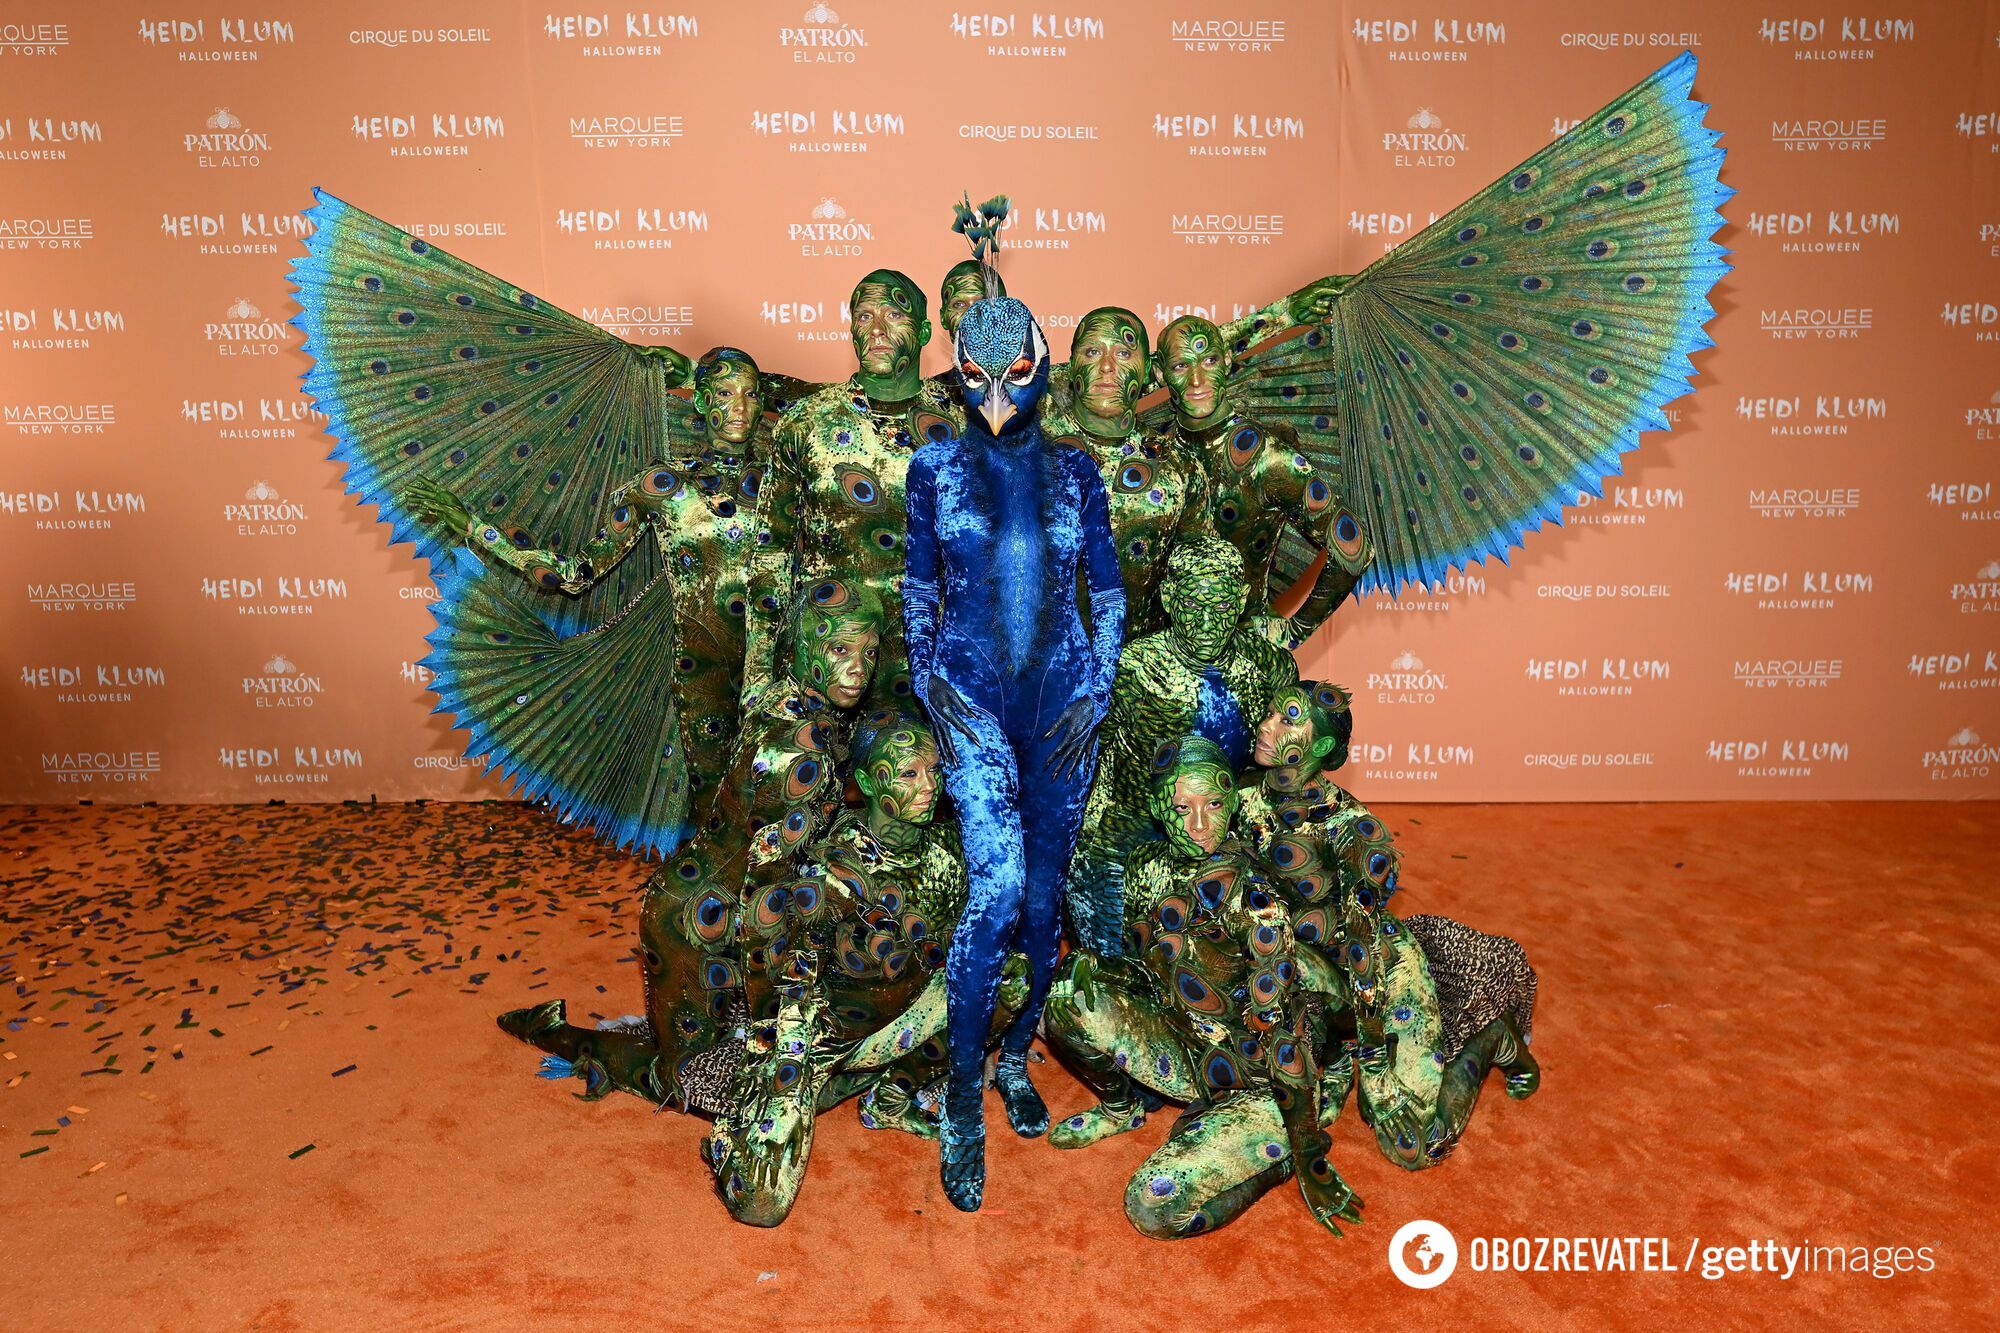 ''Queen of Halloween'' Heidi Klum shocked the public again: 10 most flamboyant costumes of the supermodel